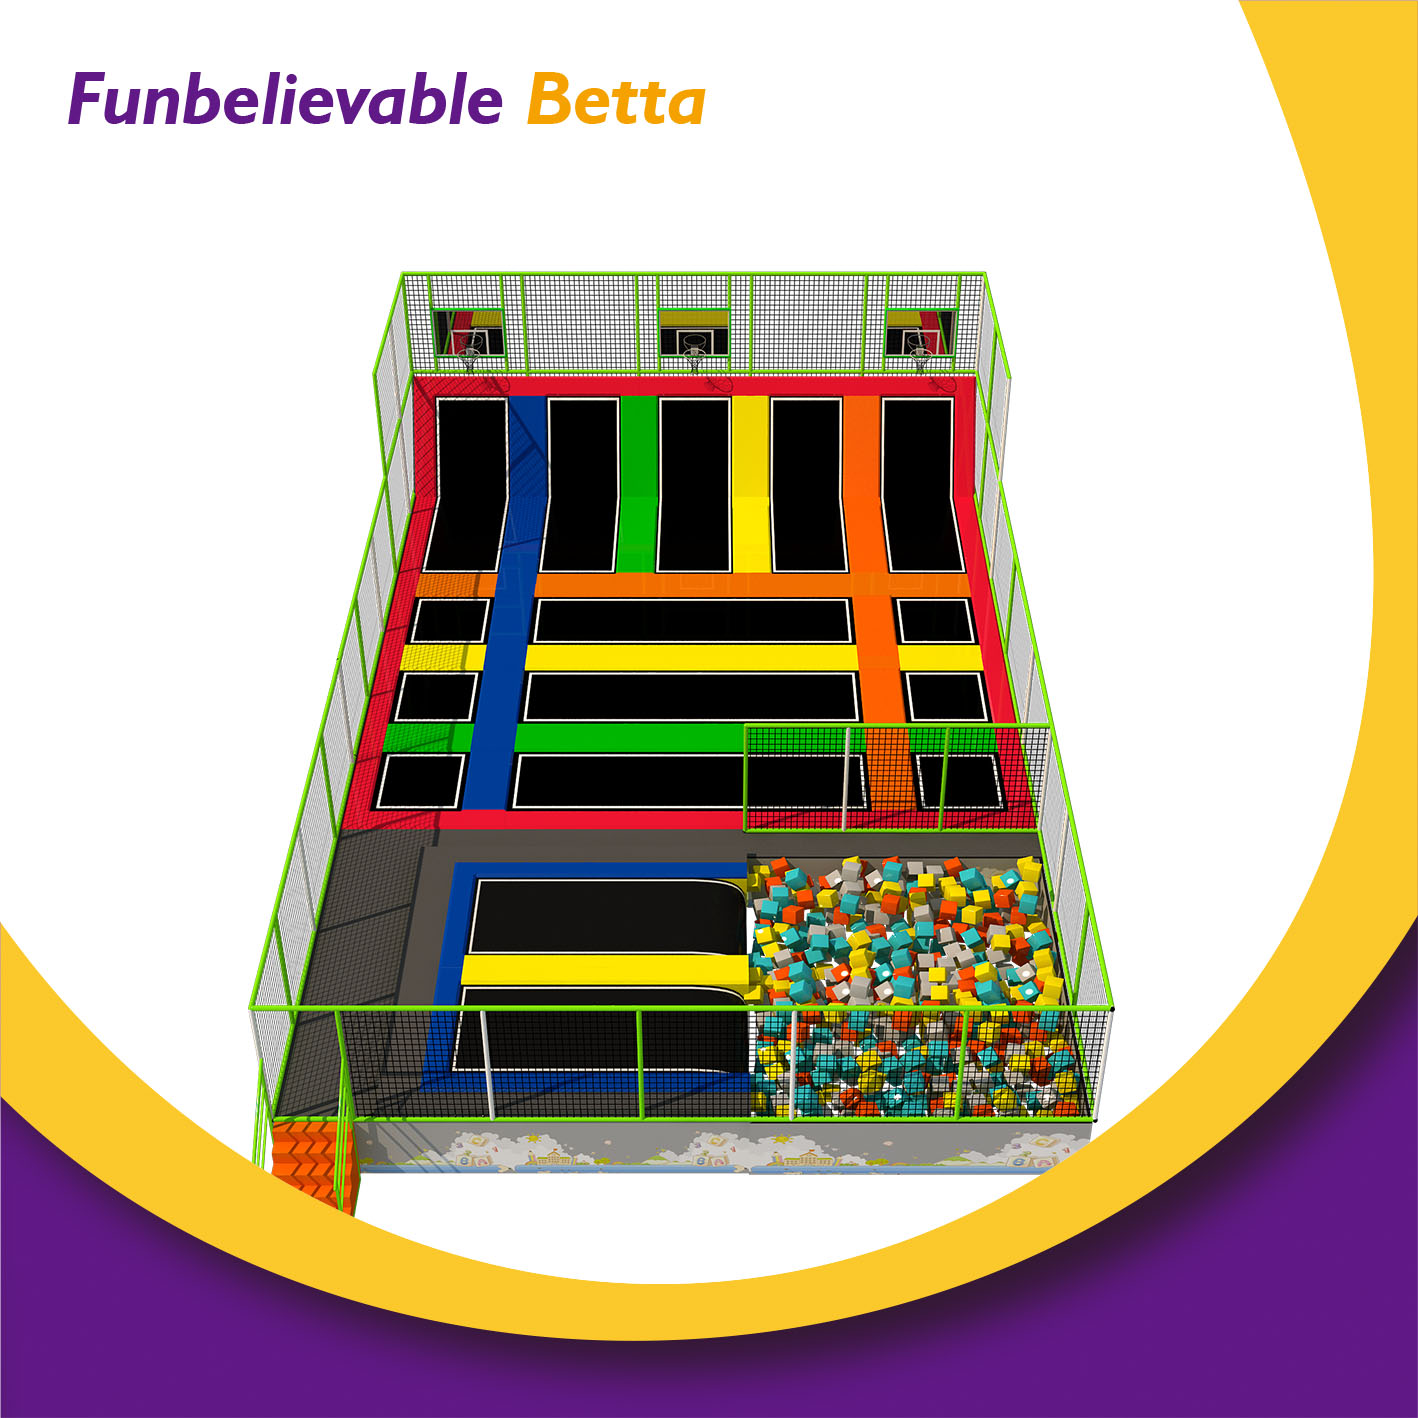 Bettaplay colorful 200--300 SQM Trampoline Park For Kids For Sale